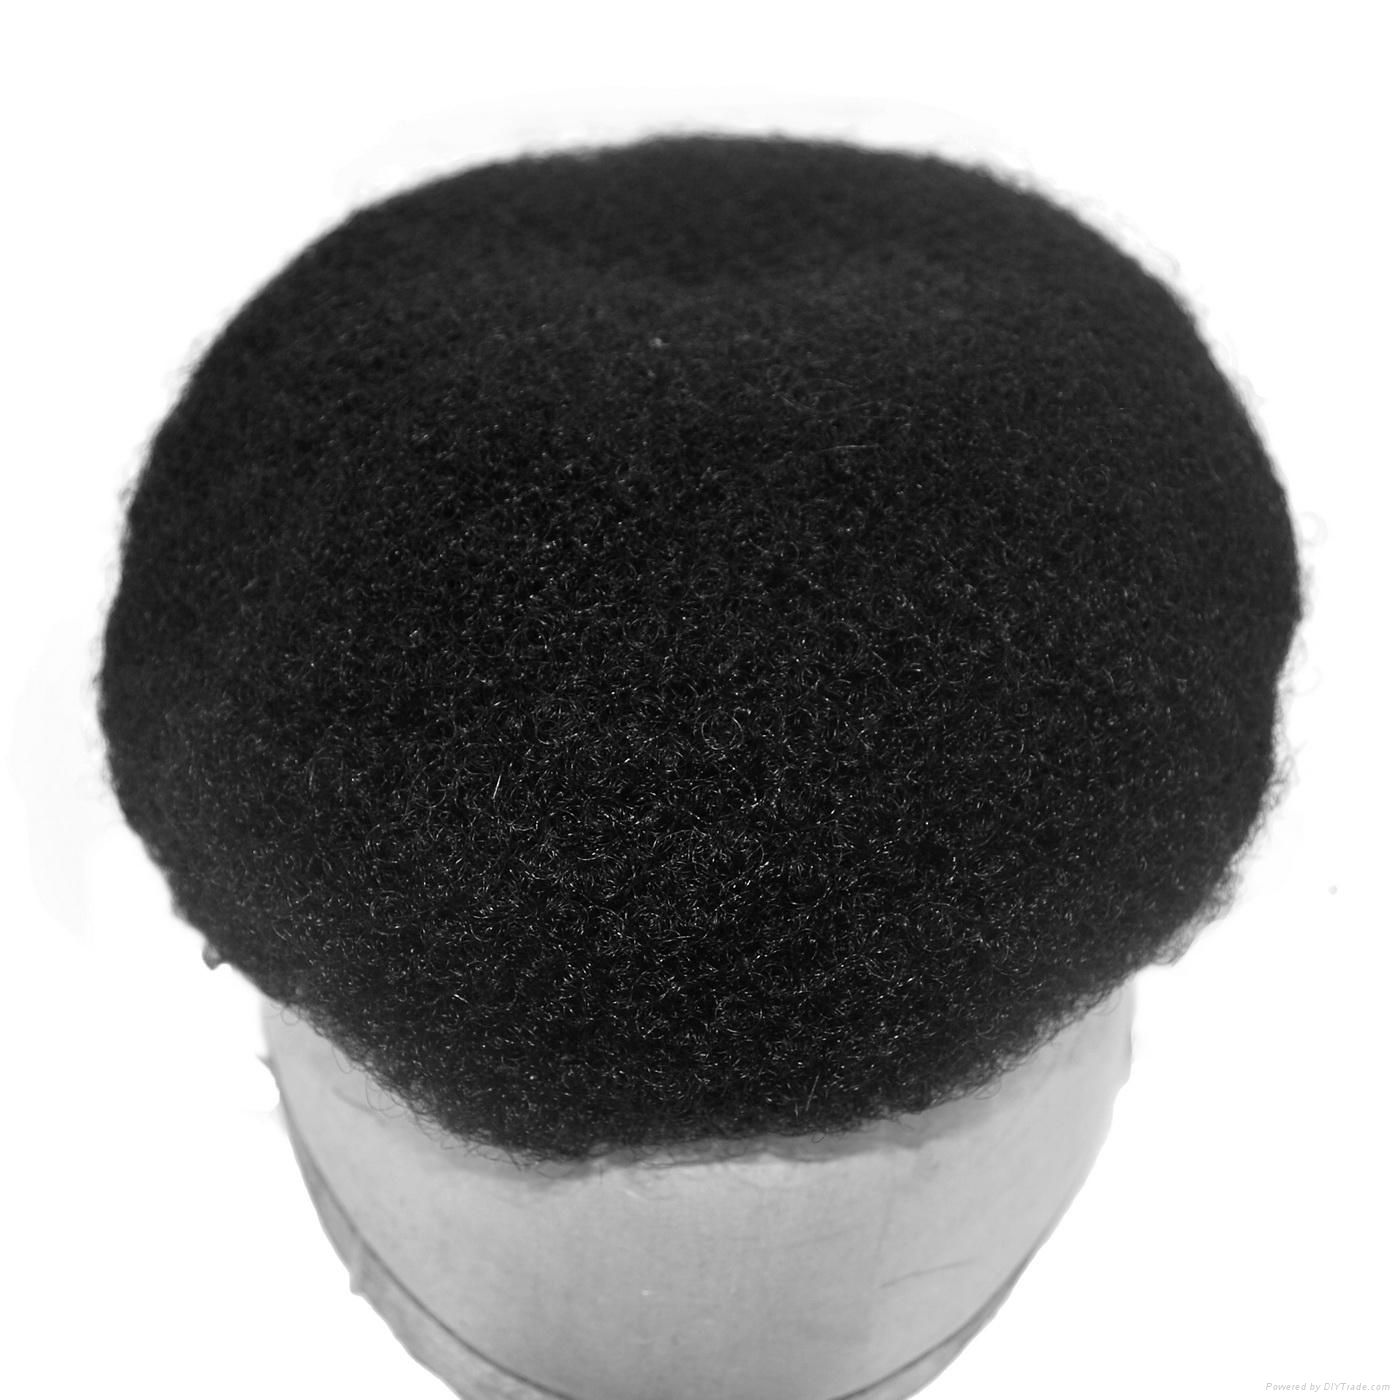 #1 afro curl full lace toupee for men in stock hairpiece for hair replacement 3